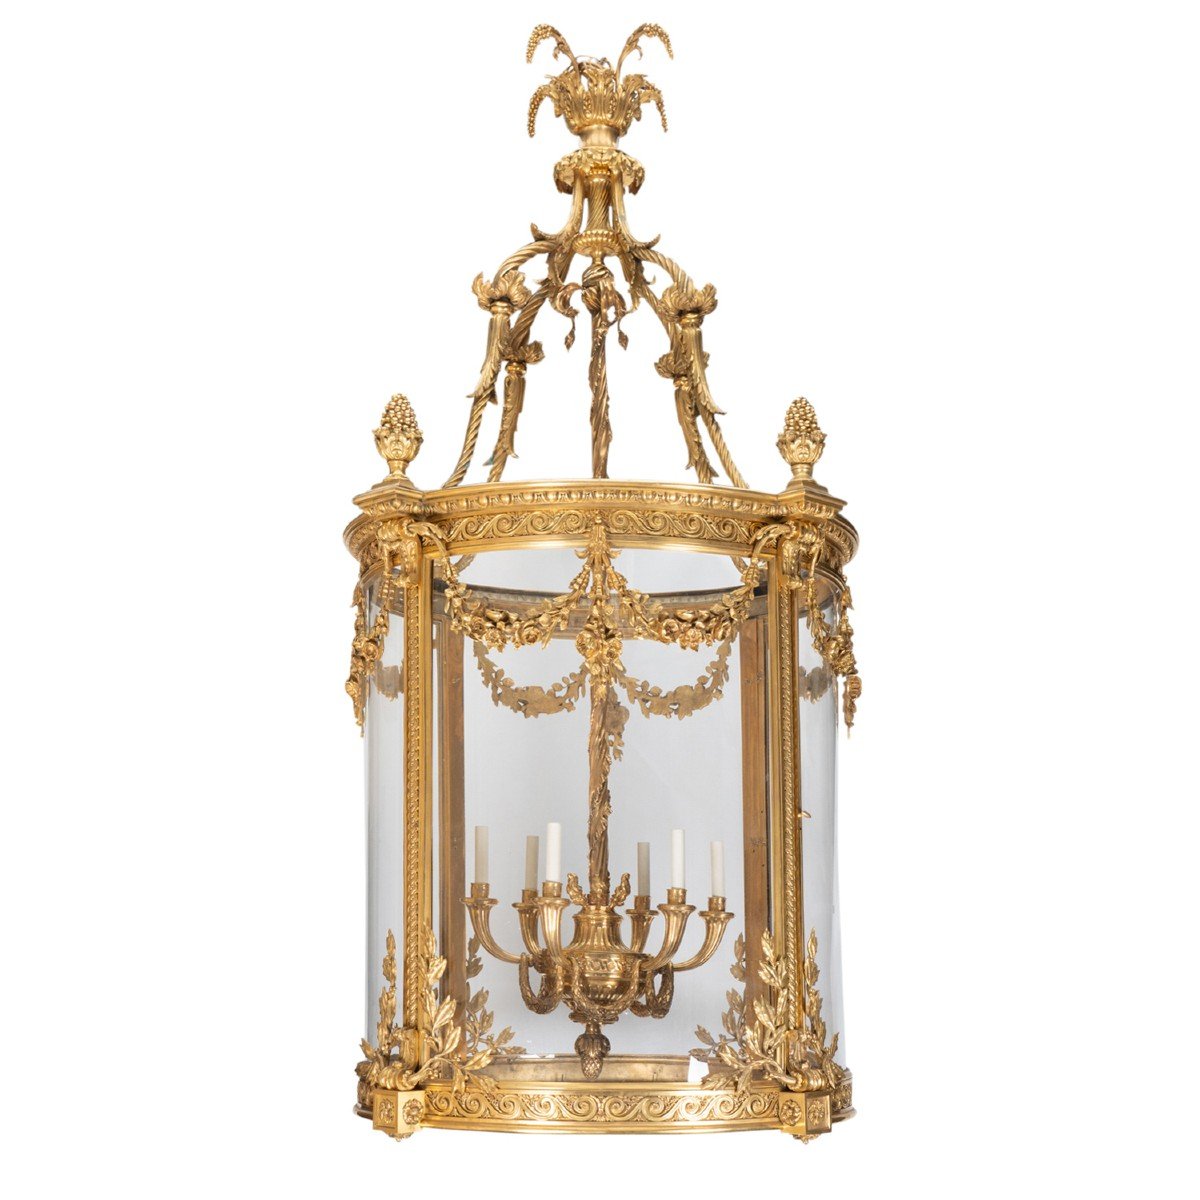 Lantern With Garlands Of Flowers In Gilded Bronze And Curved Glass, 19th Century